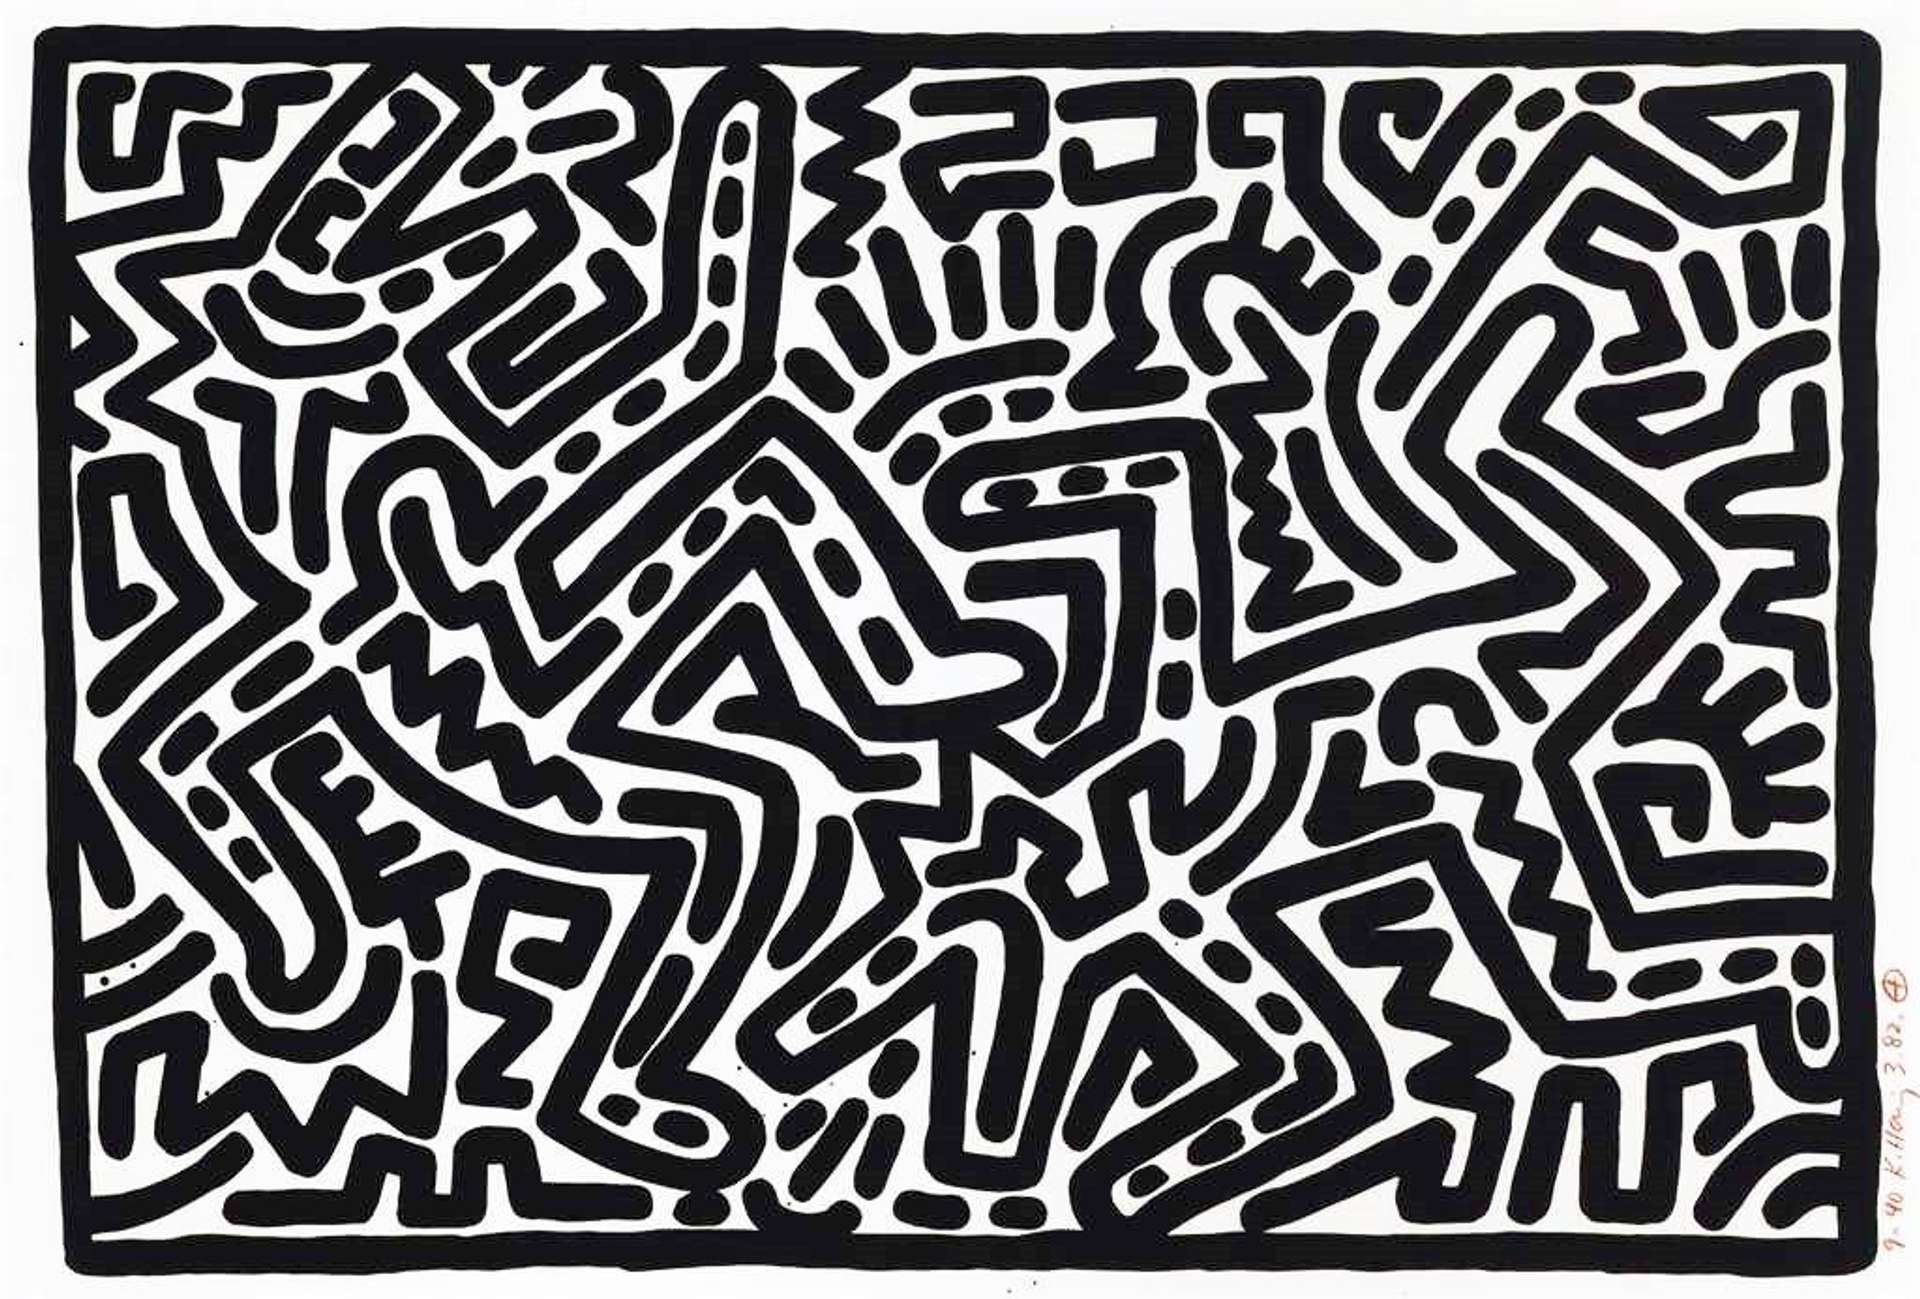 Keith Haring Plate V, Untitled 1 - 6 (Signed Print) 1982